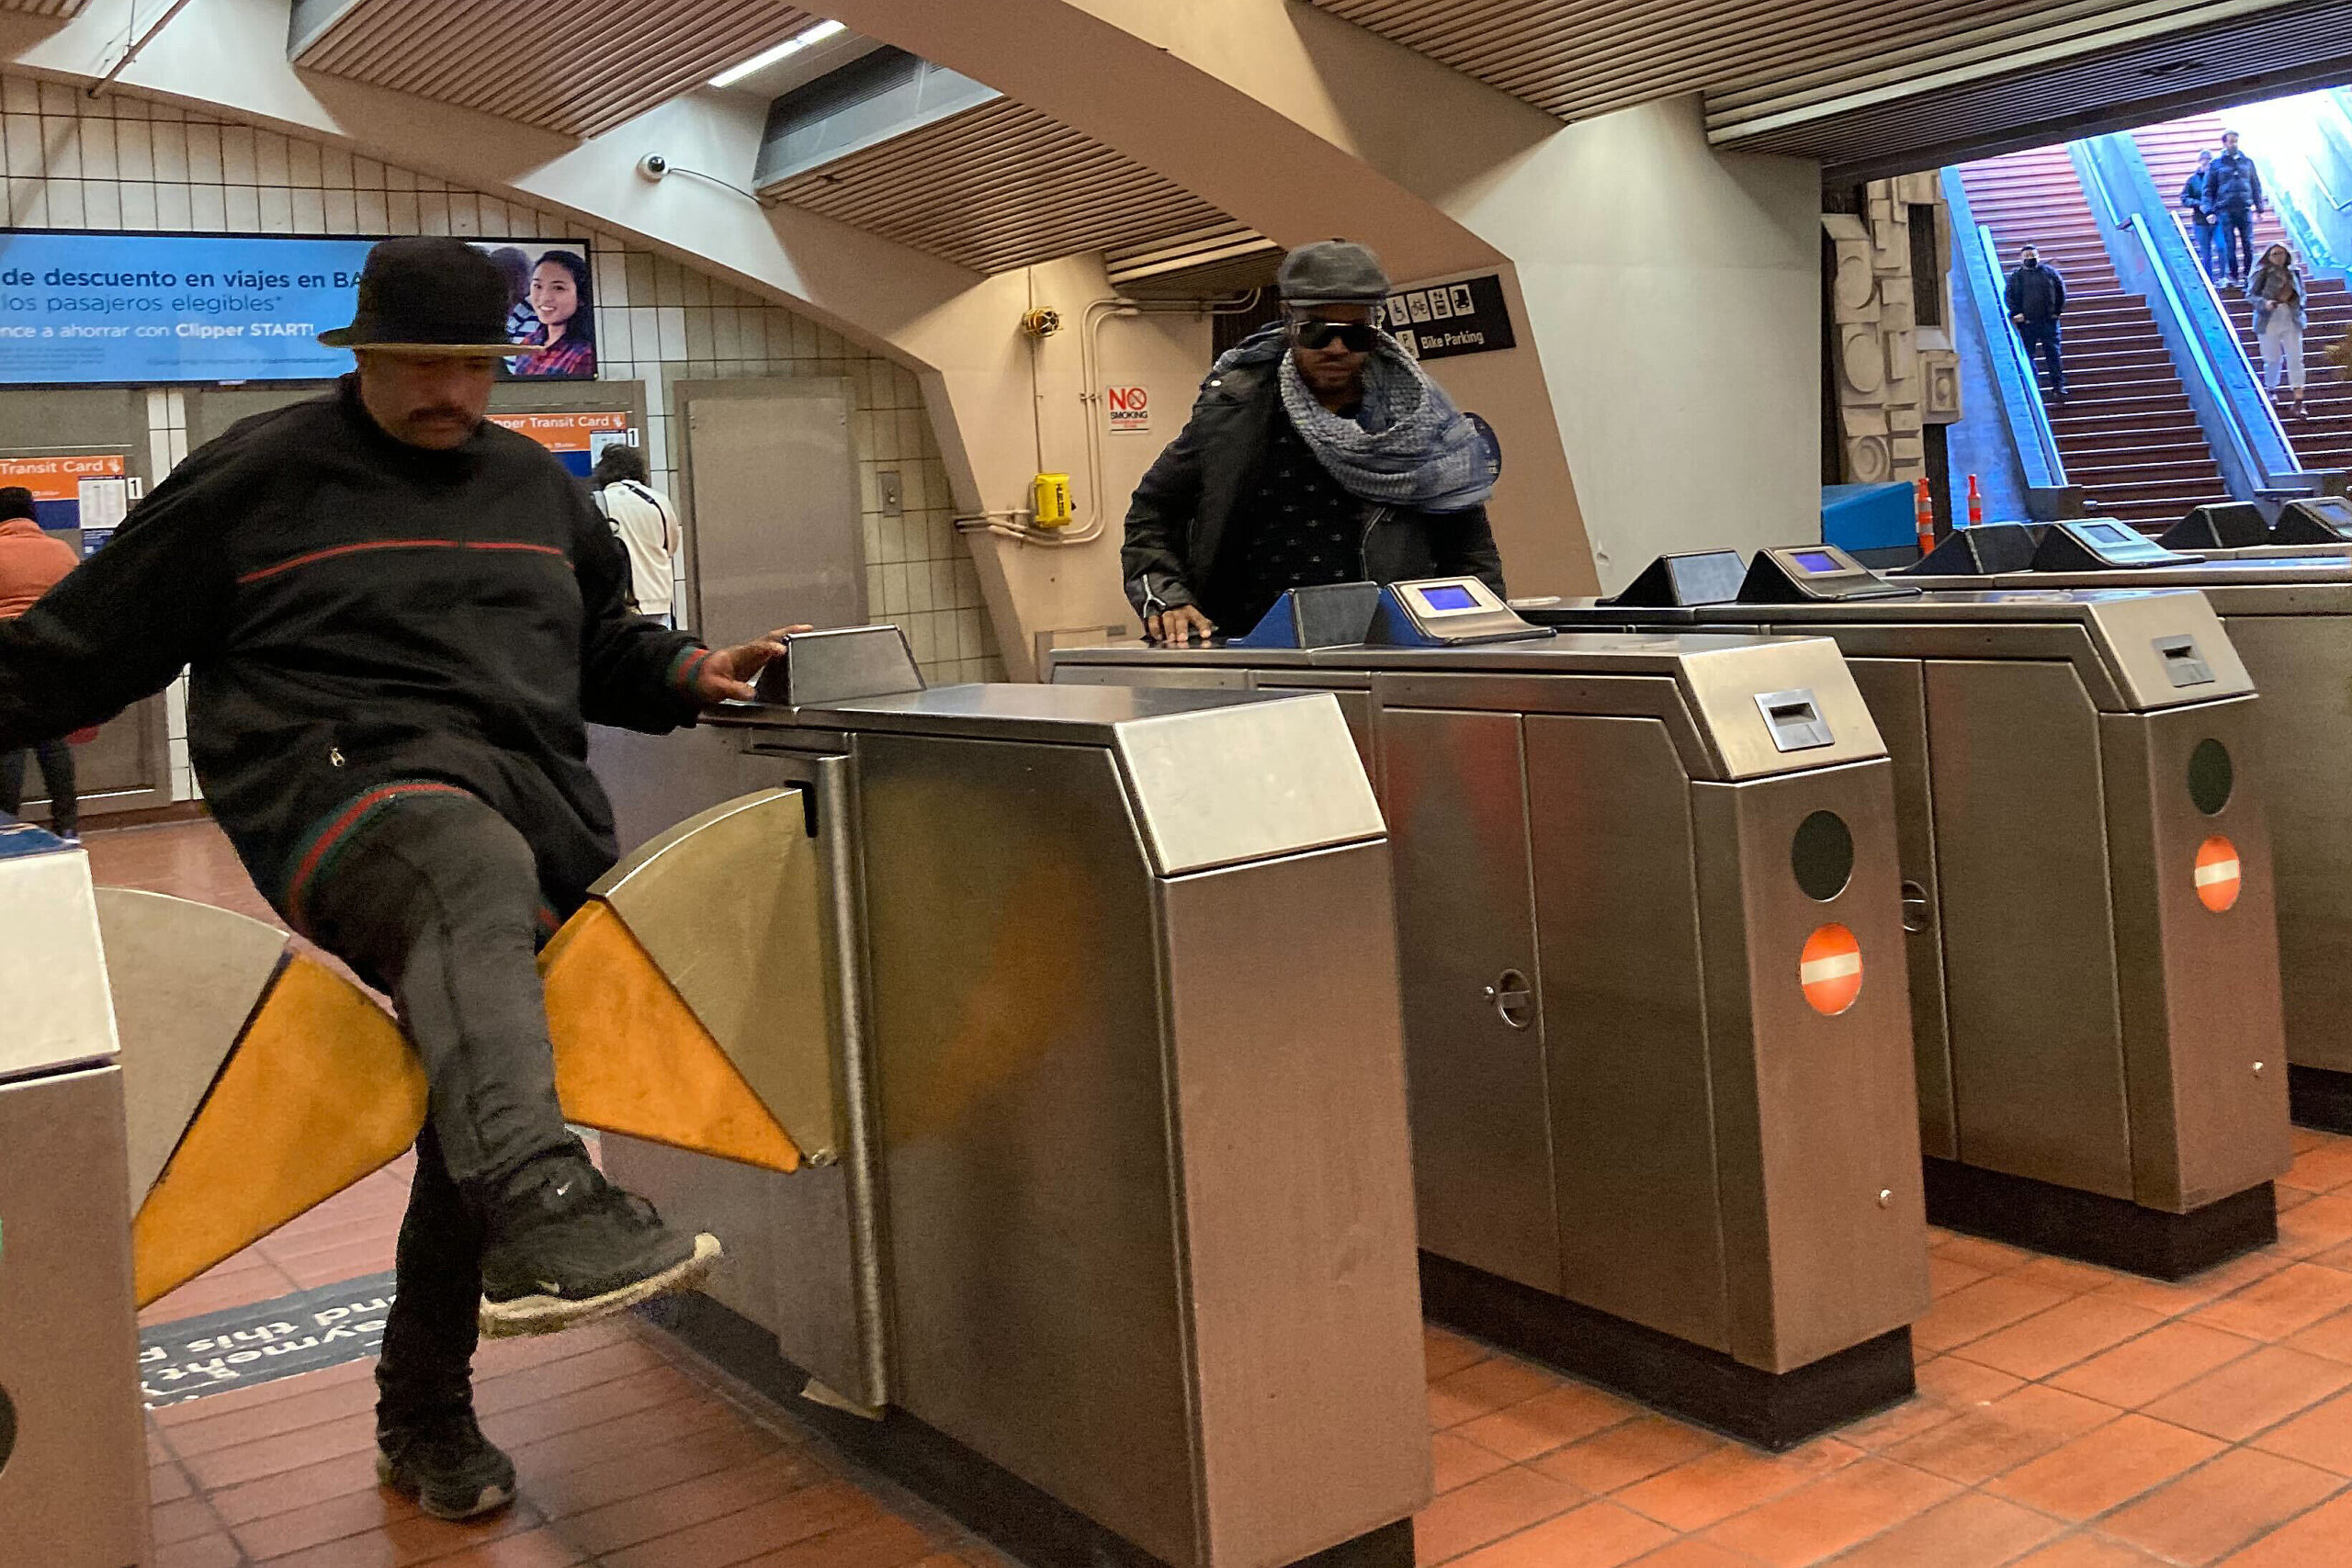 Man in black sweater steps over an orange fare gate in a train station